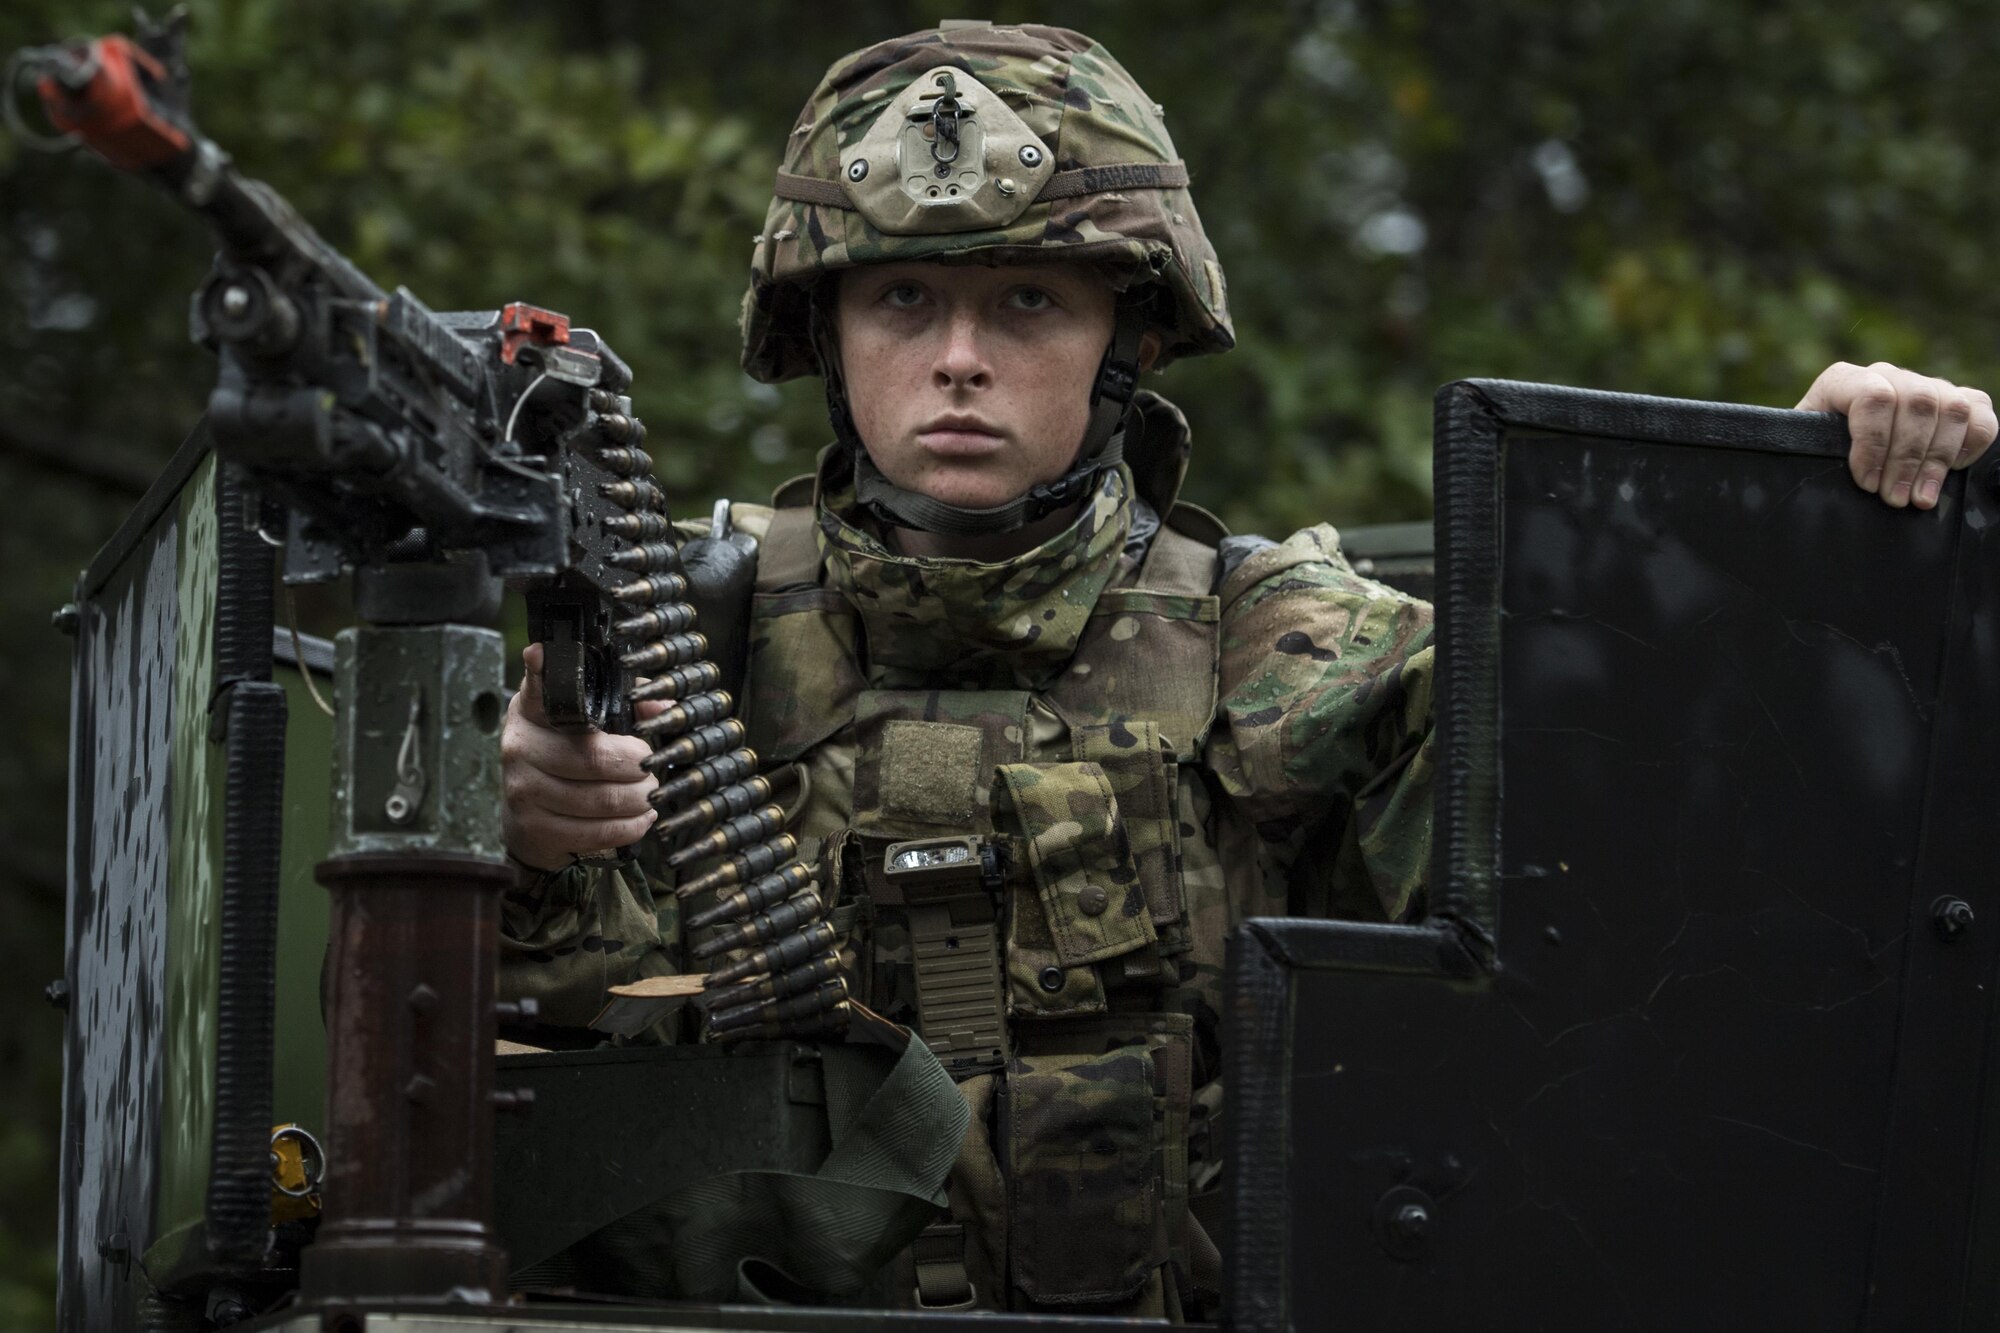 Airman 1st Class Haley Sahagan, 823d Base Defense Squadron fireteam member, watches for threats in the turret of a Humvee during a mission readiness exercise, Oct. 23, 2017, at Moody Air Force Base, Ga. The 820th Base Defense Group tested the 823d BDS’s ability to operate in an austere environment with challenging scenarios that tested their capabilities and effectiveness. (U.S. Air Force Senior Airman Janiqua P. Robinson)